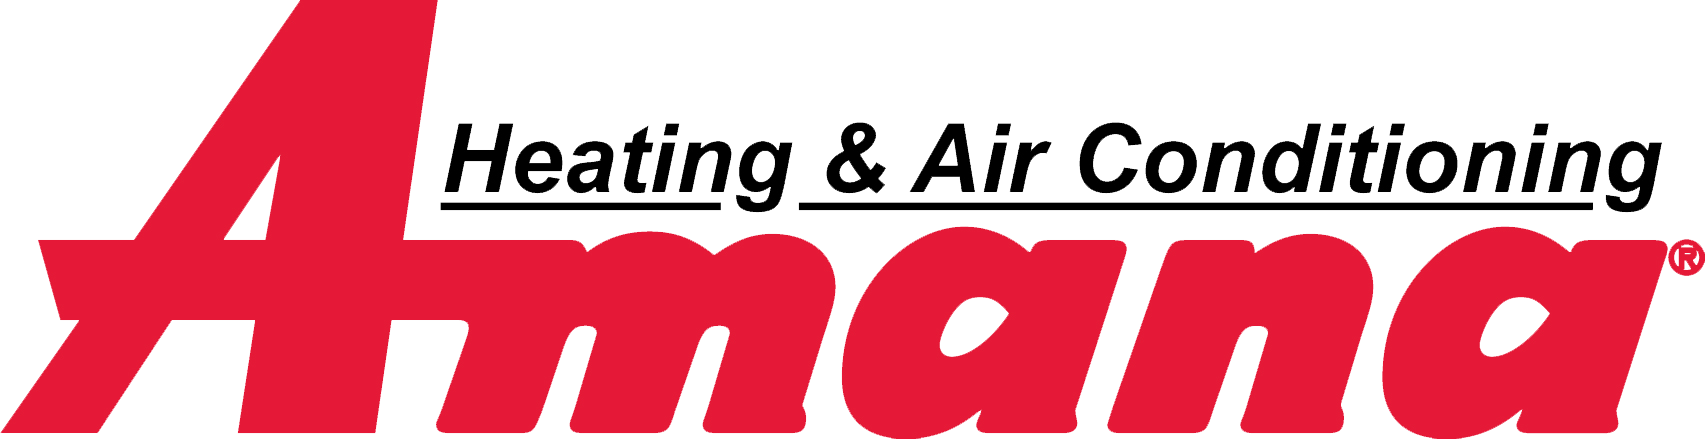 Heating & Air Conditioning Amana icon